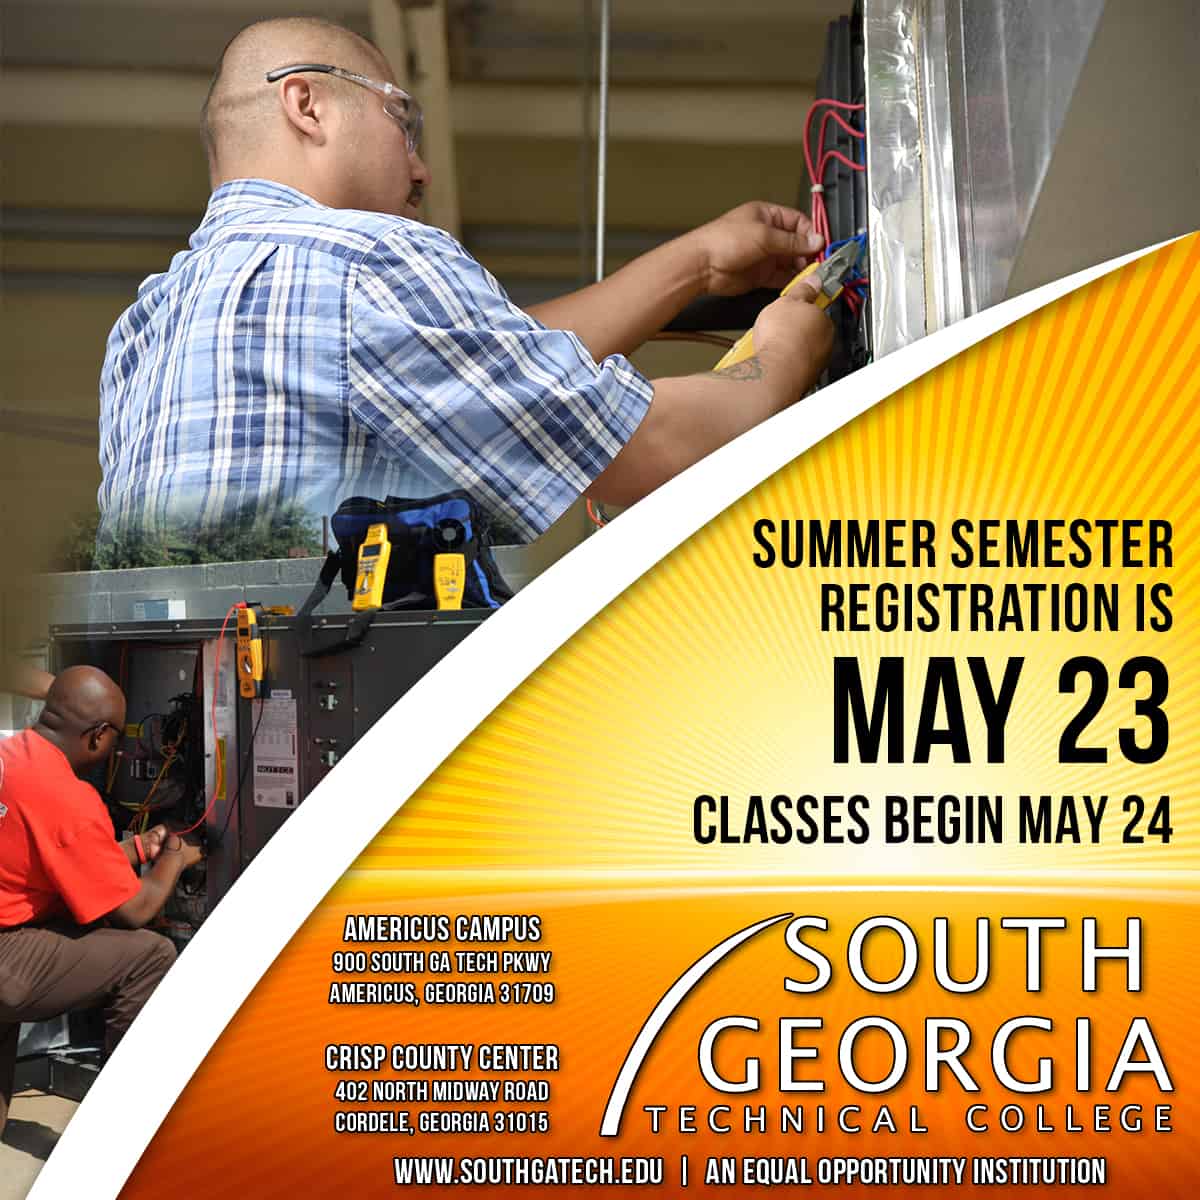 Shown above is information about summer semester registration.